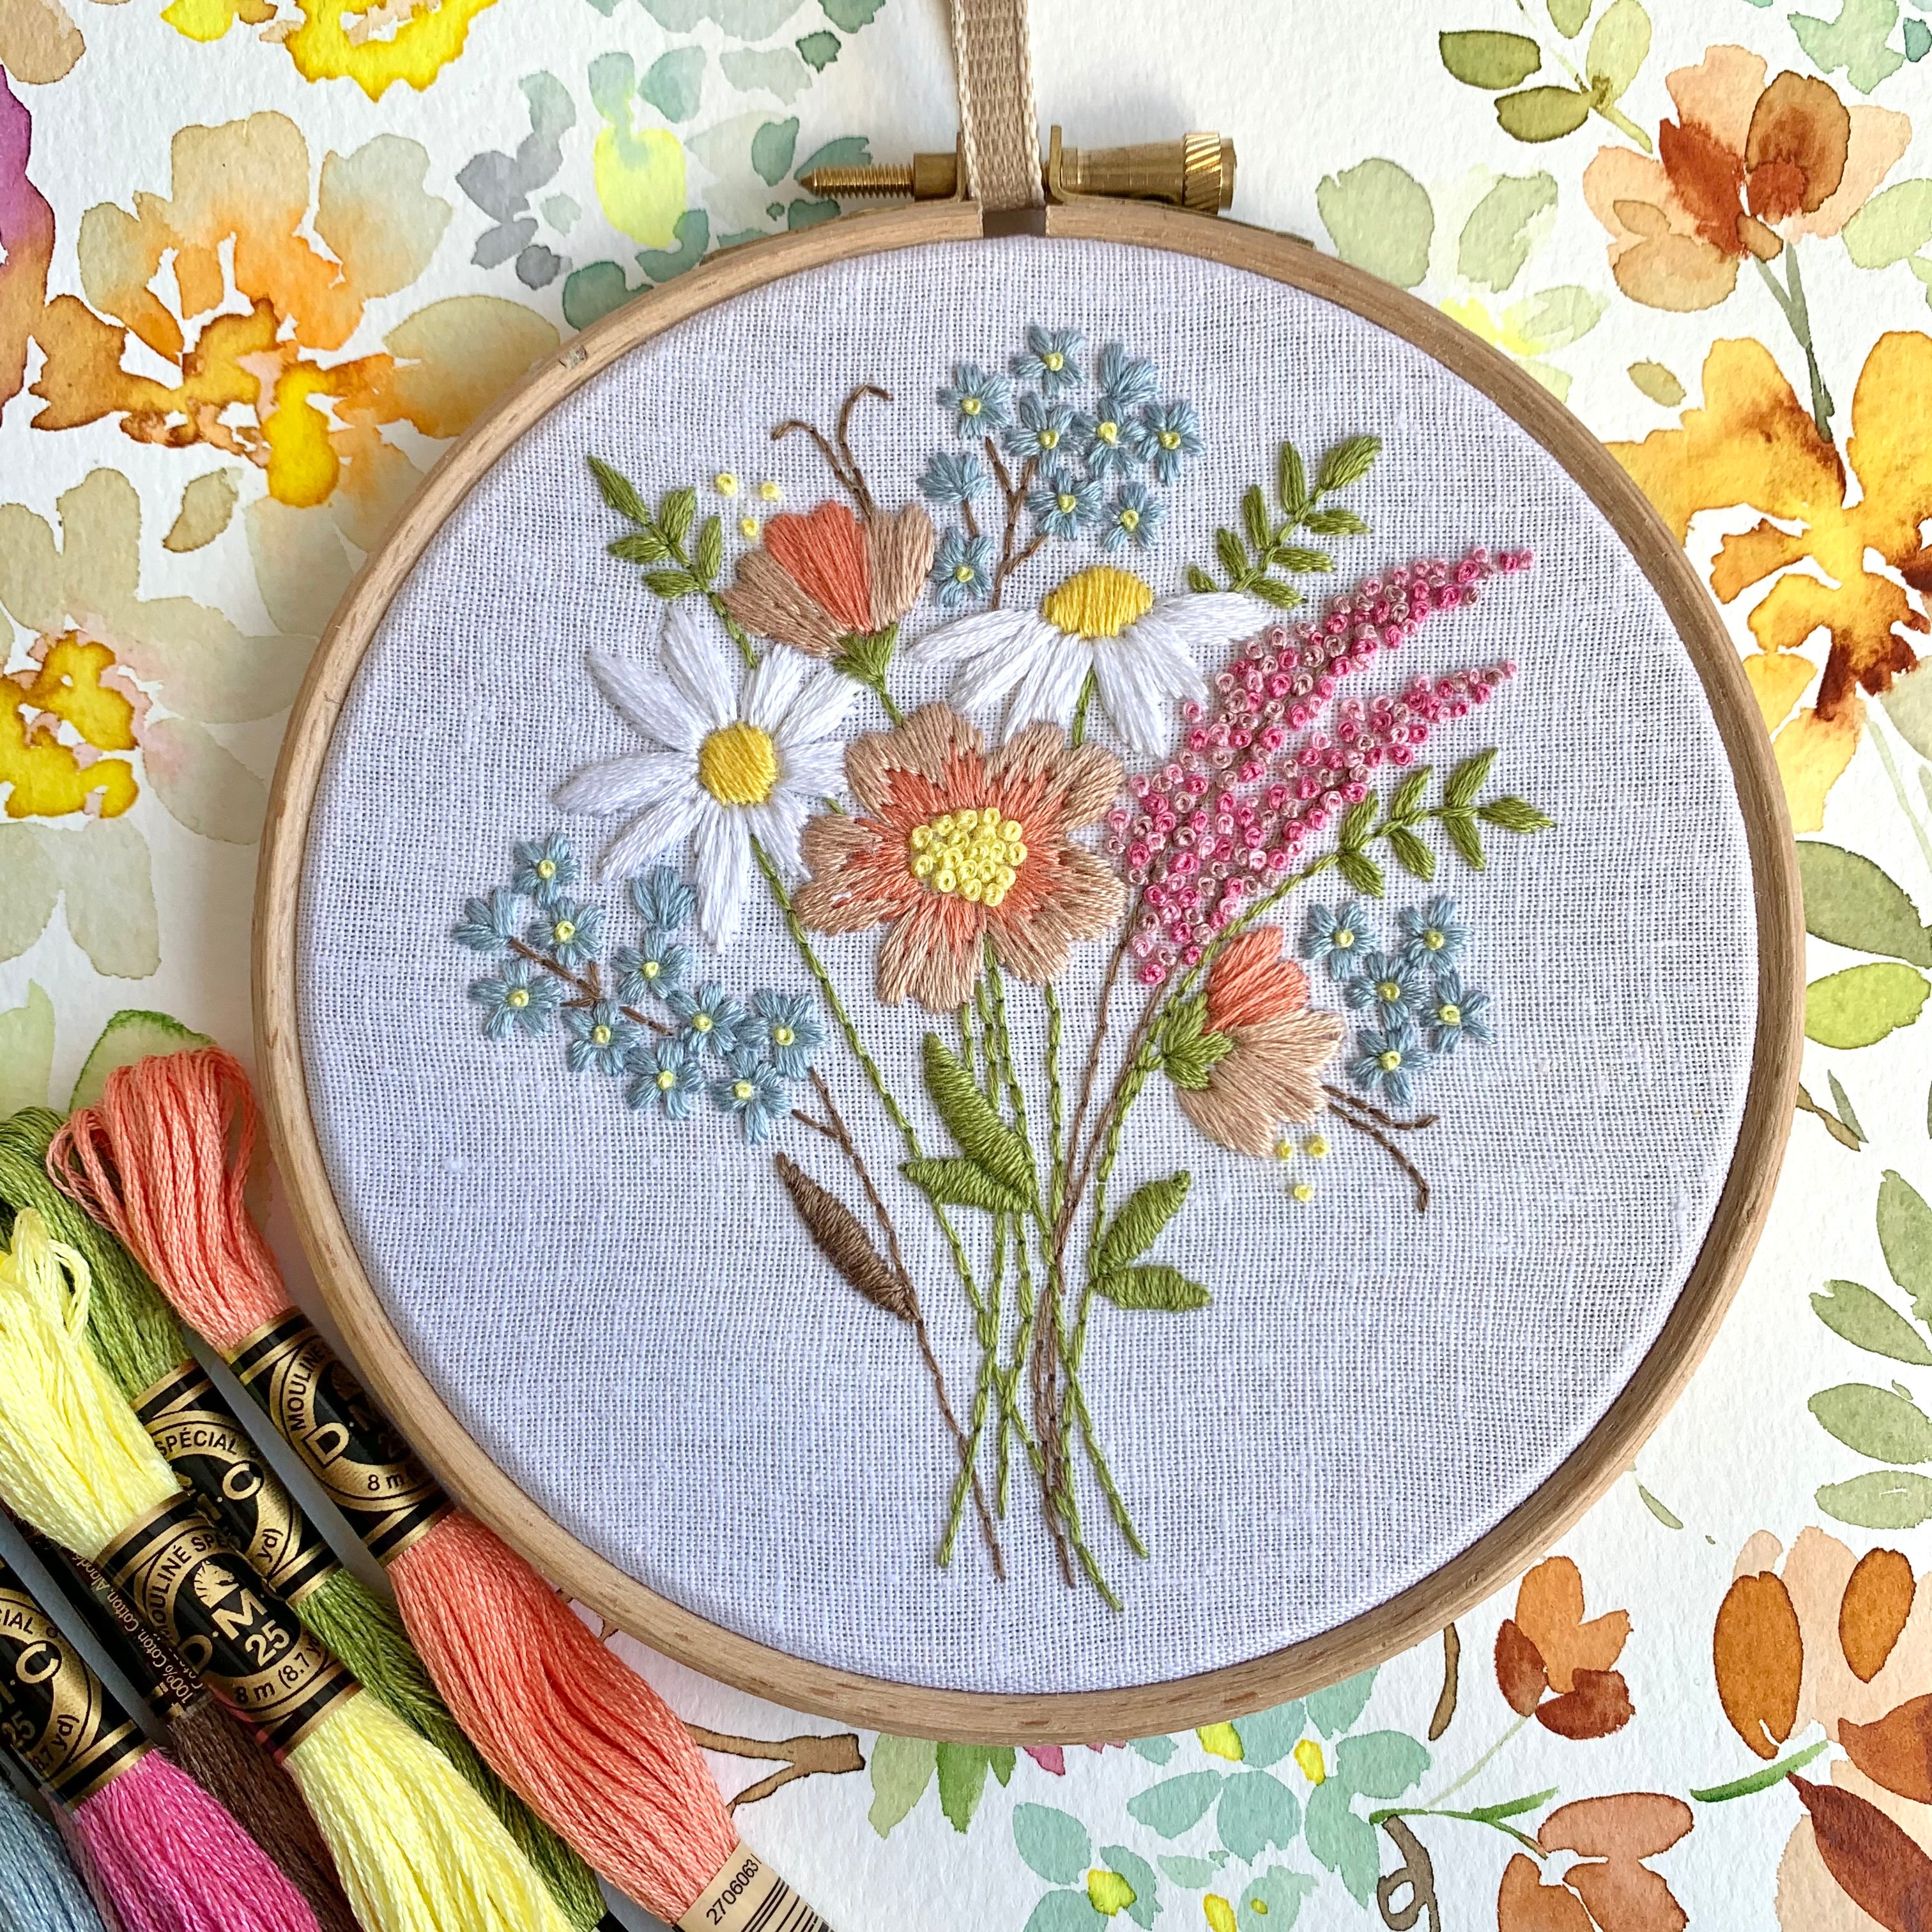 PDF 5 inch Petite Posy Hoop From the Petite Bouquet collection.